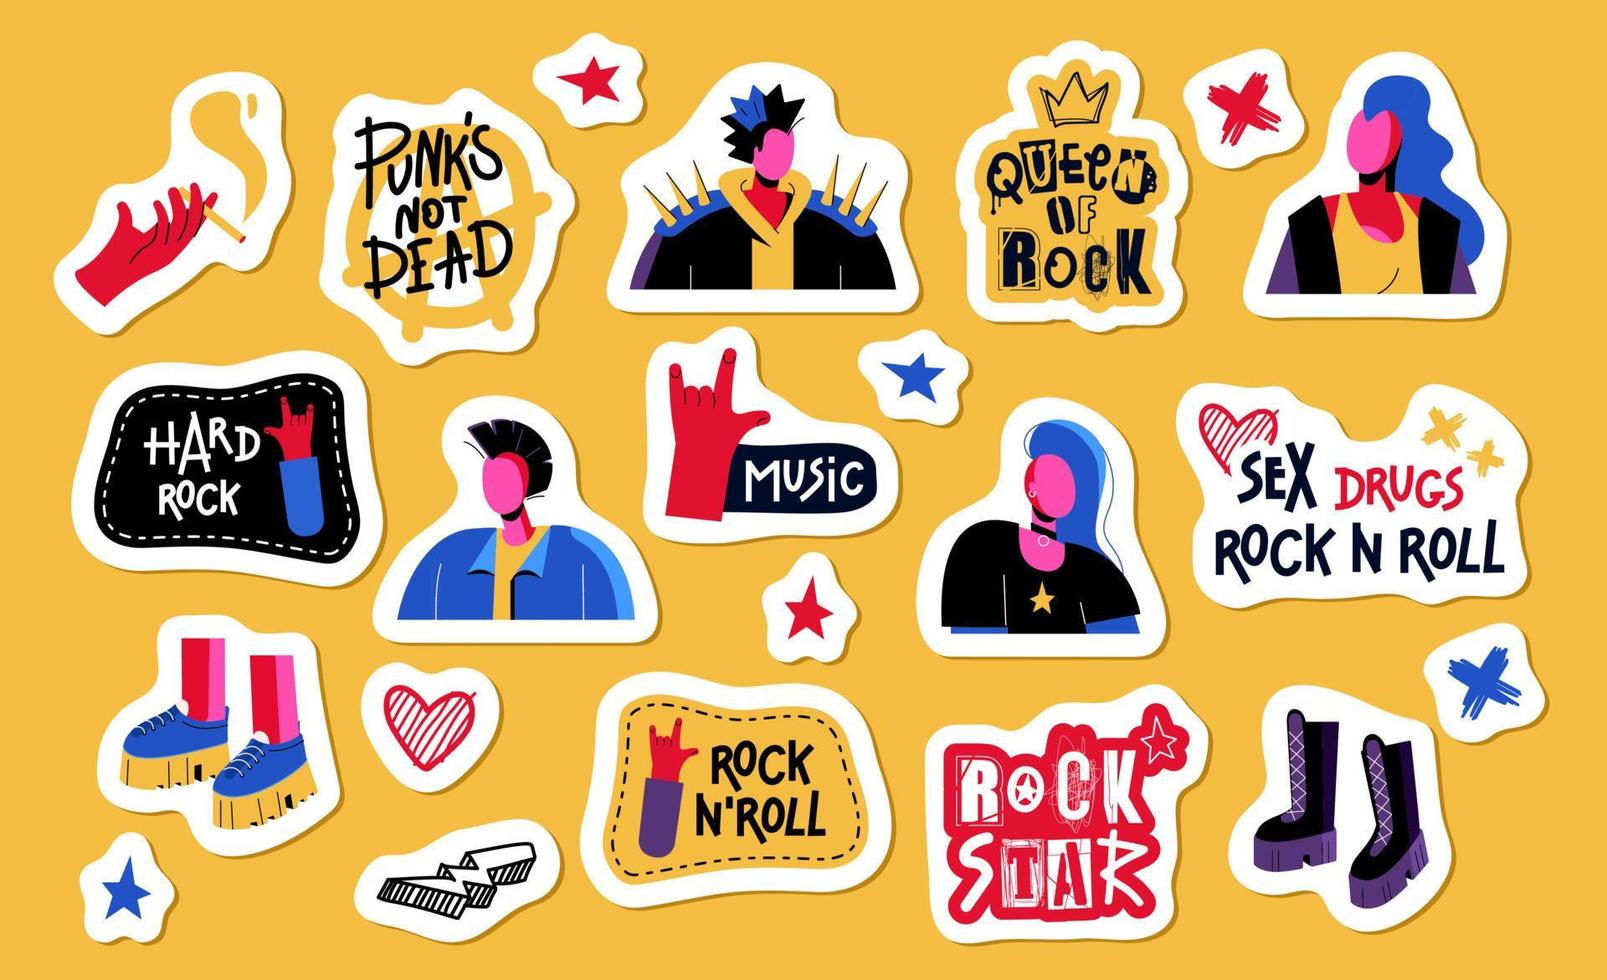 https://static.vecteezy.com/system/resources/previews/013/660/954/non_2x/a-set-of-stickers-rock-punks-mohawks-hard-rock-rock-and-roll-and-anarchy-horns-that-rocks-vector.jpg